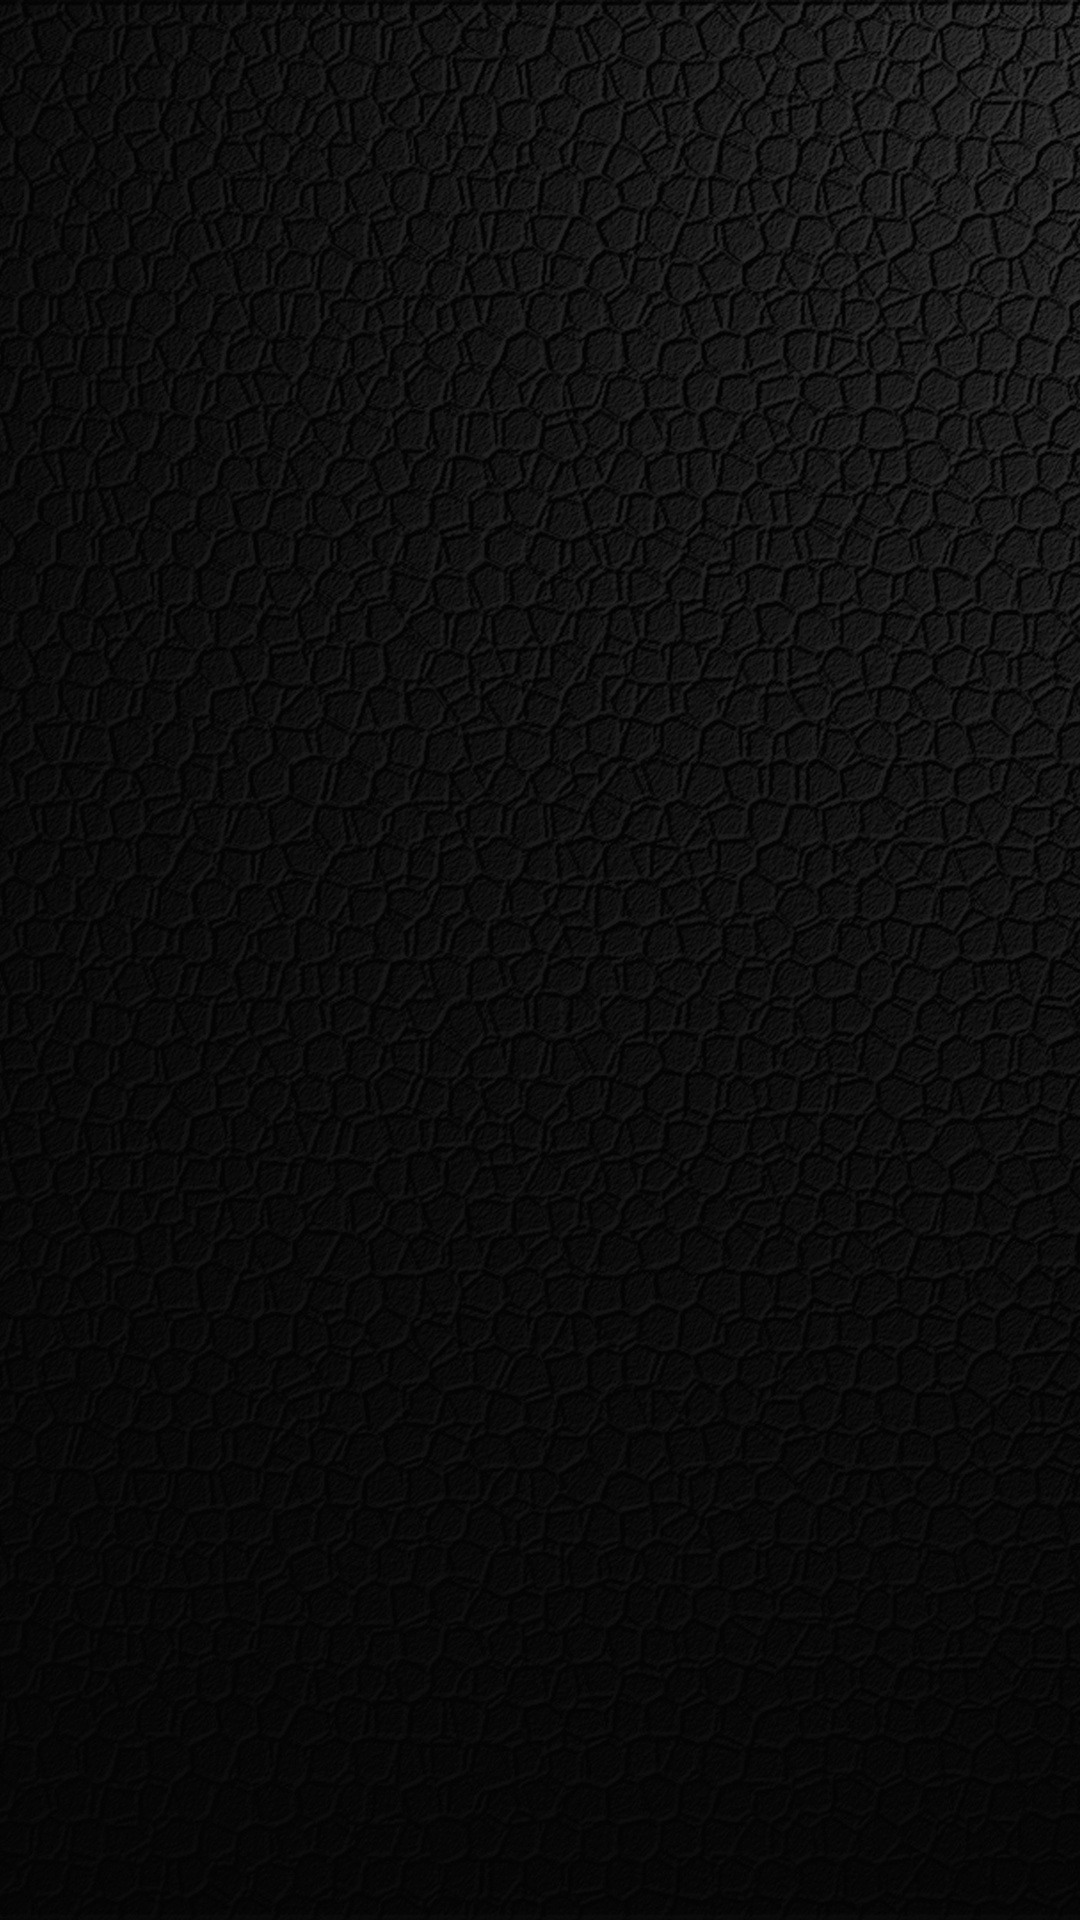 1080x1920 Black Skin Texture Iphone 7,6s,6 Plus, Pixel xl ,One Plus 3,3t,5  HD 4k Wallpapers, Images, Backgrounds, Photos and Pictures